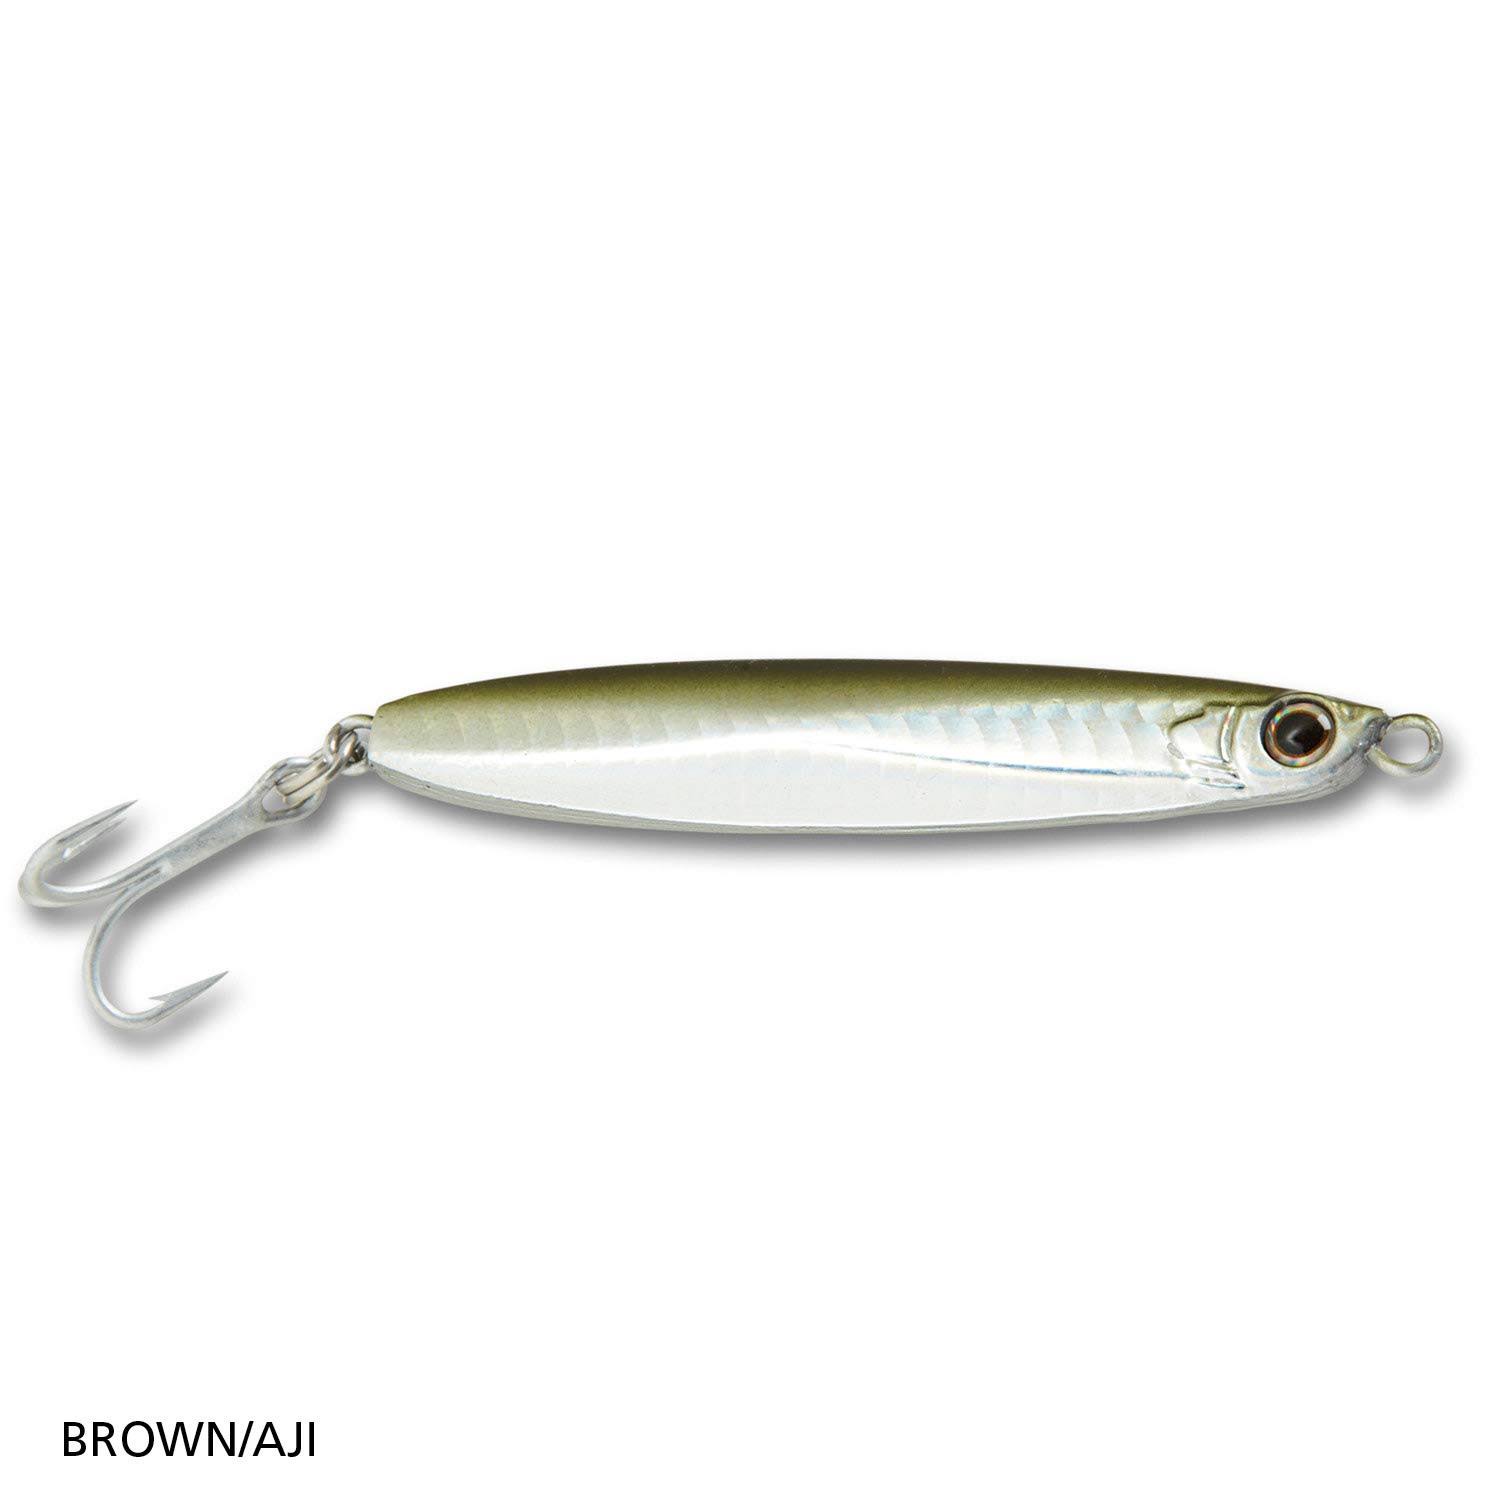 Shimano Coltsniper Jig Slow Fall Lure | Boating & Fishing | Free Shipping On All Orders | Best Price Guarantee | 30 Day Money Back Guarantee